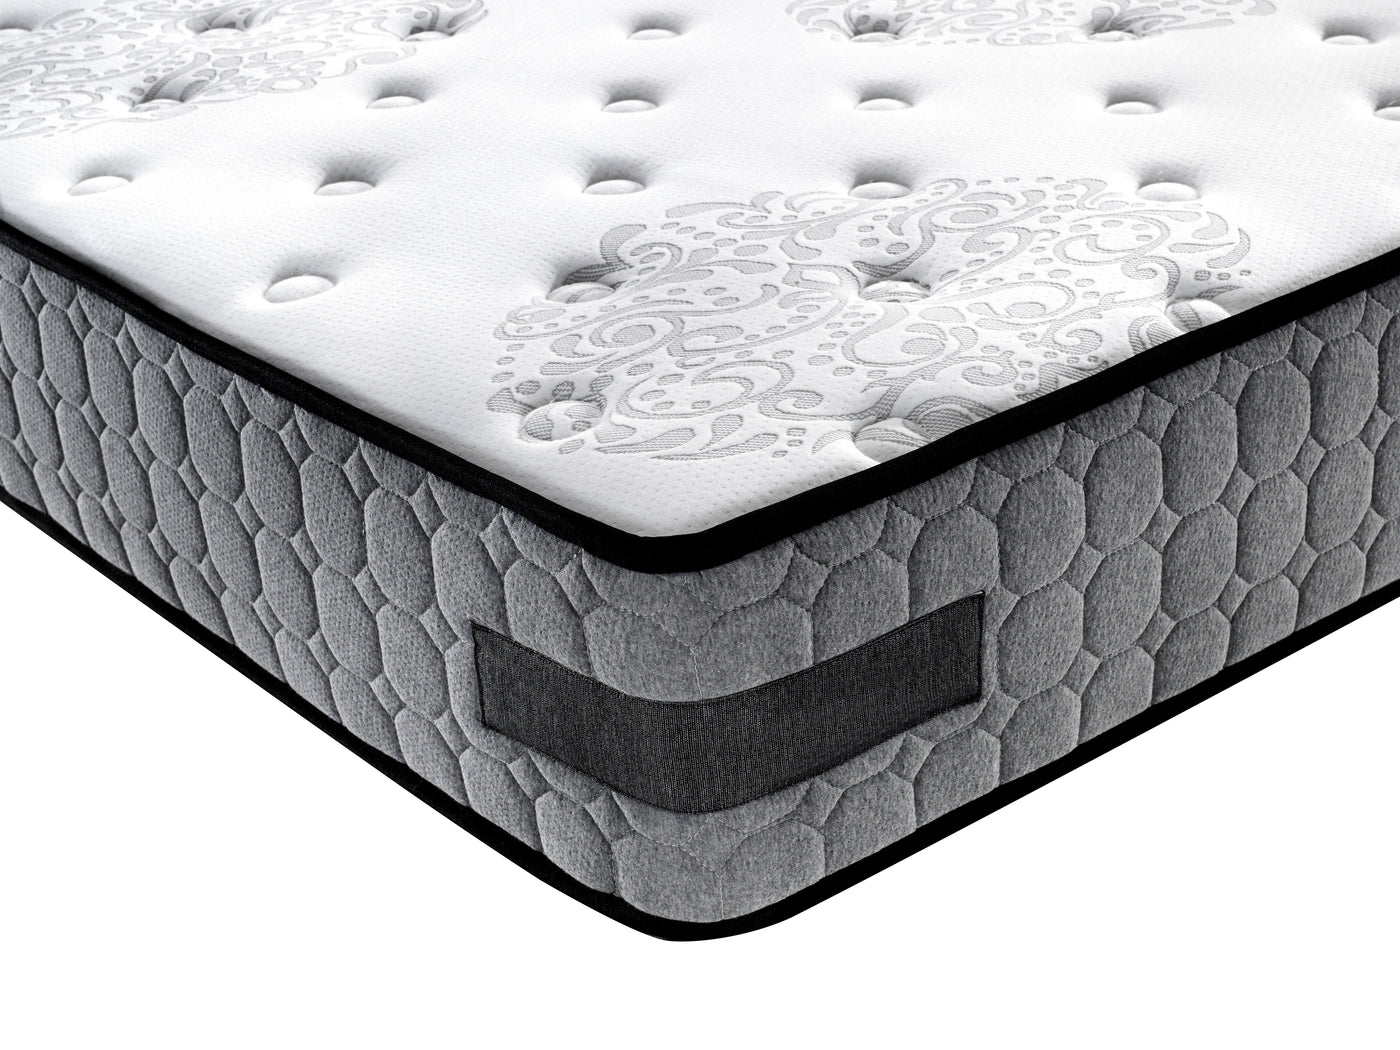 Kingston 3 Drawer Storage Bed Frame (Grey Fabric) and Windsor Latex Pocket Spring Mattress Combo Deal (7811914629374)